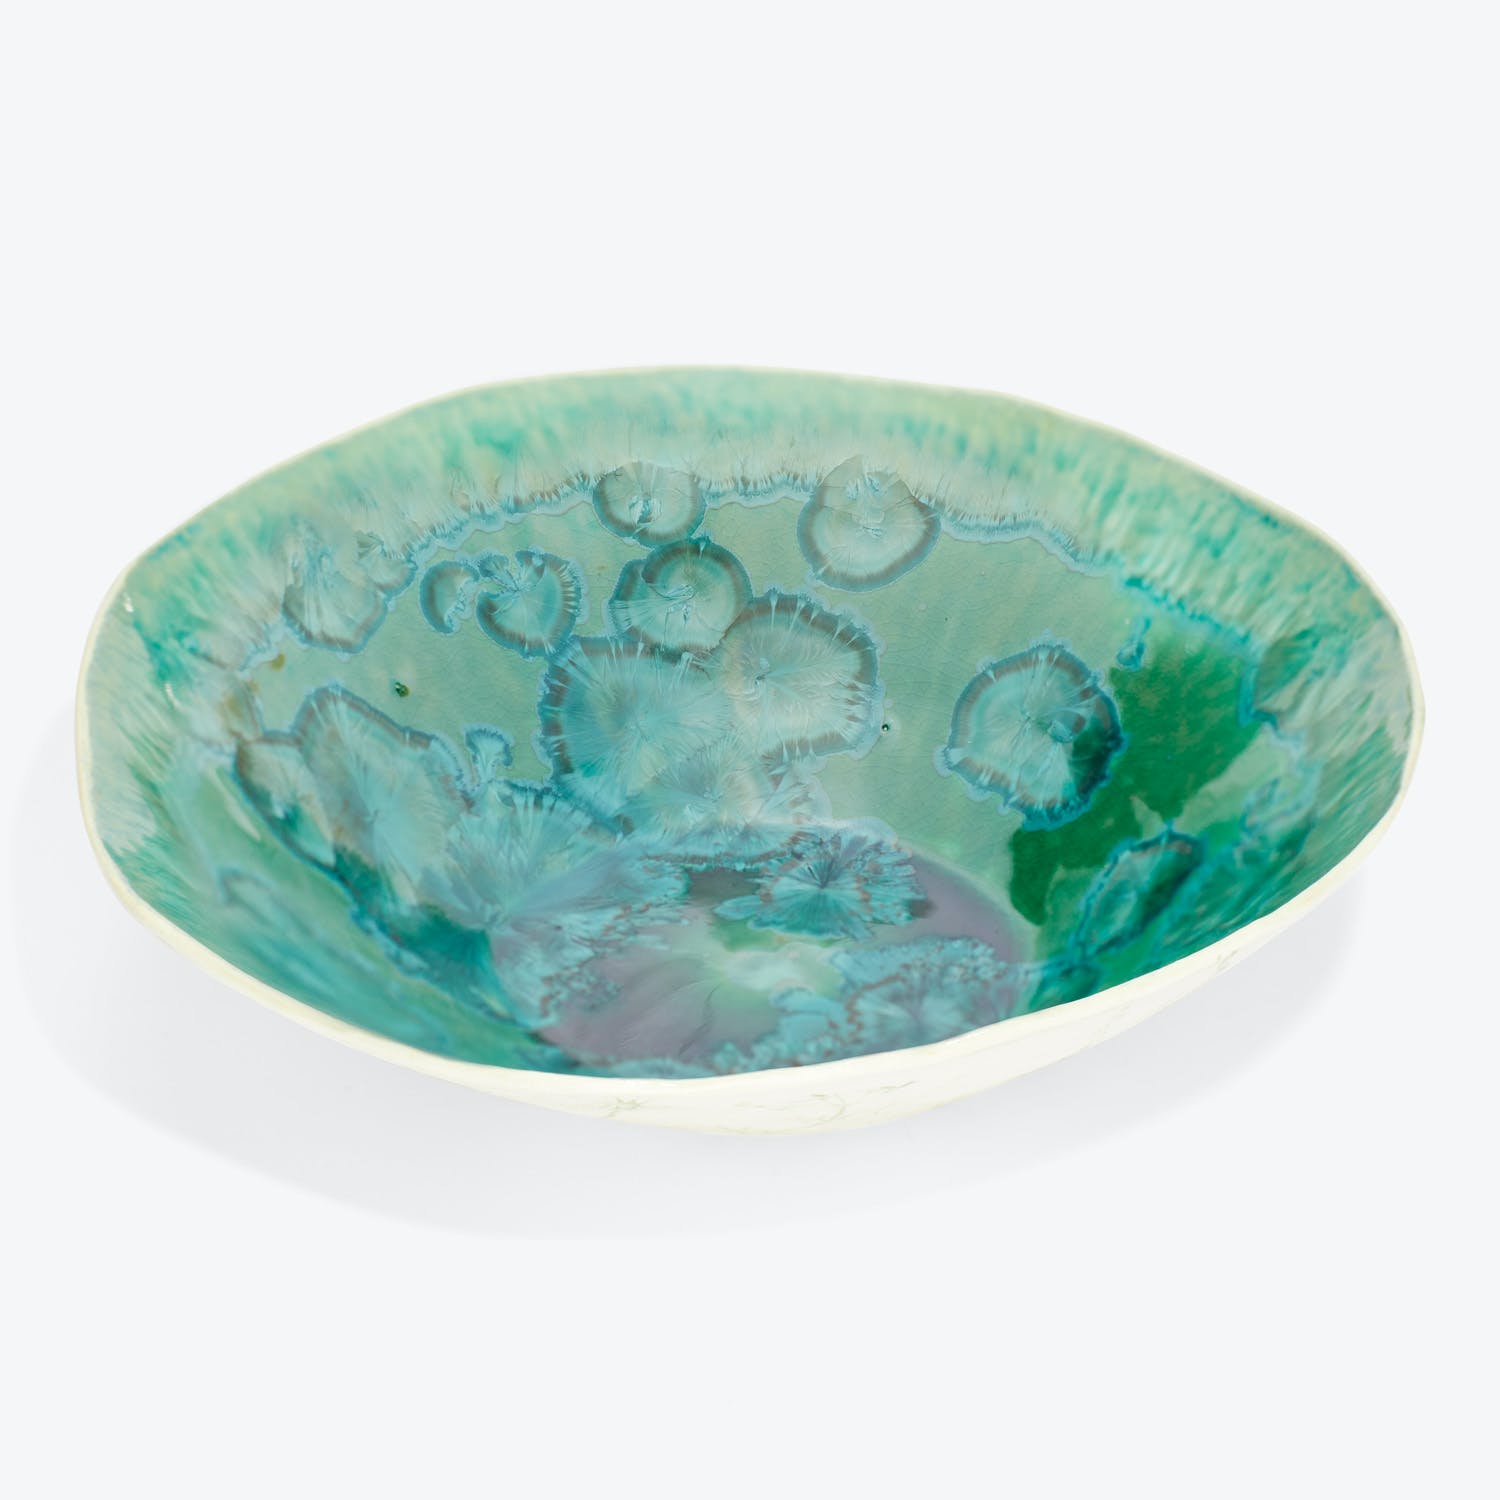 Vibrant decorative bowl with undulating rim evokes watercolor painting aesthetic.